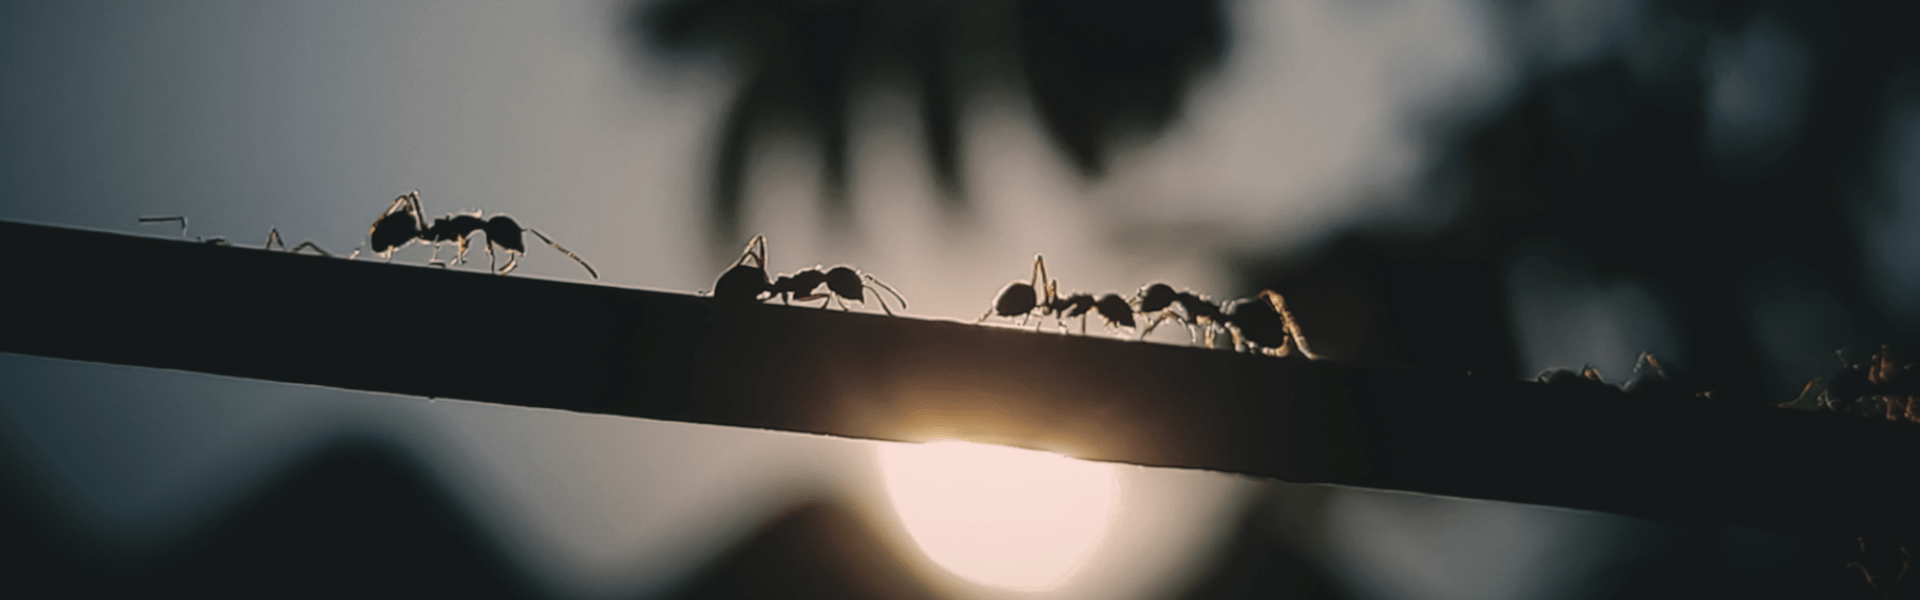 An image of four ants crawling across a tree branch.